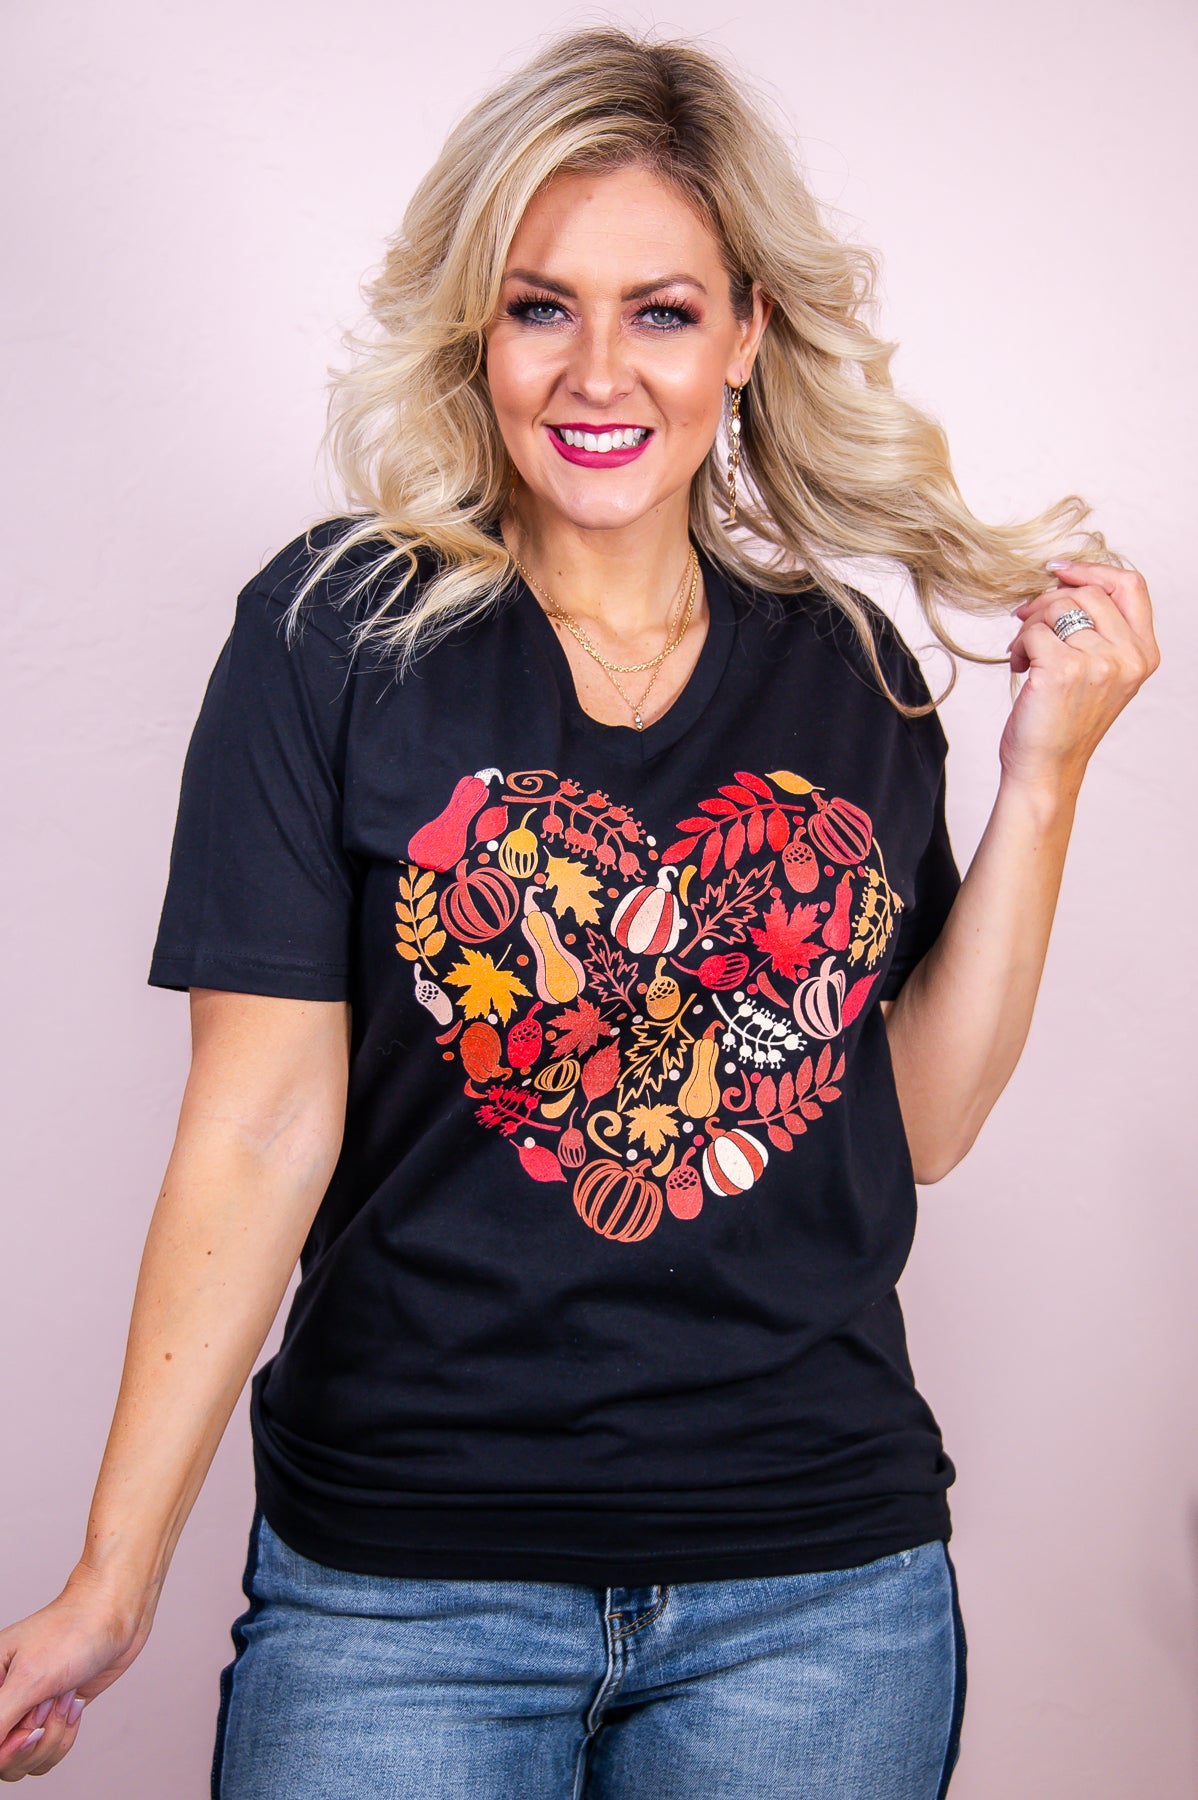 In Love With Fall Black Fall Heart Graphic Tee - A2991BK